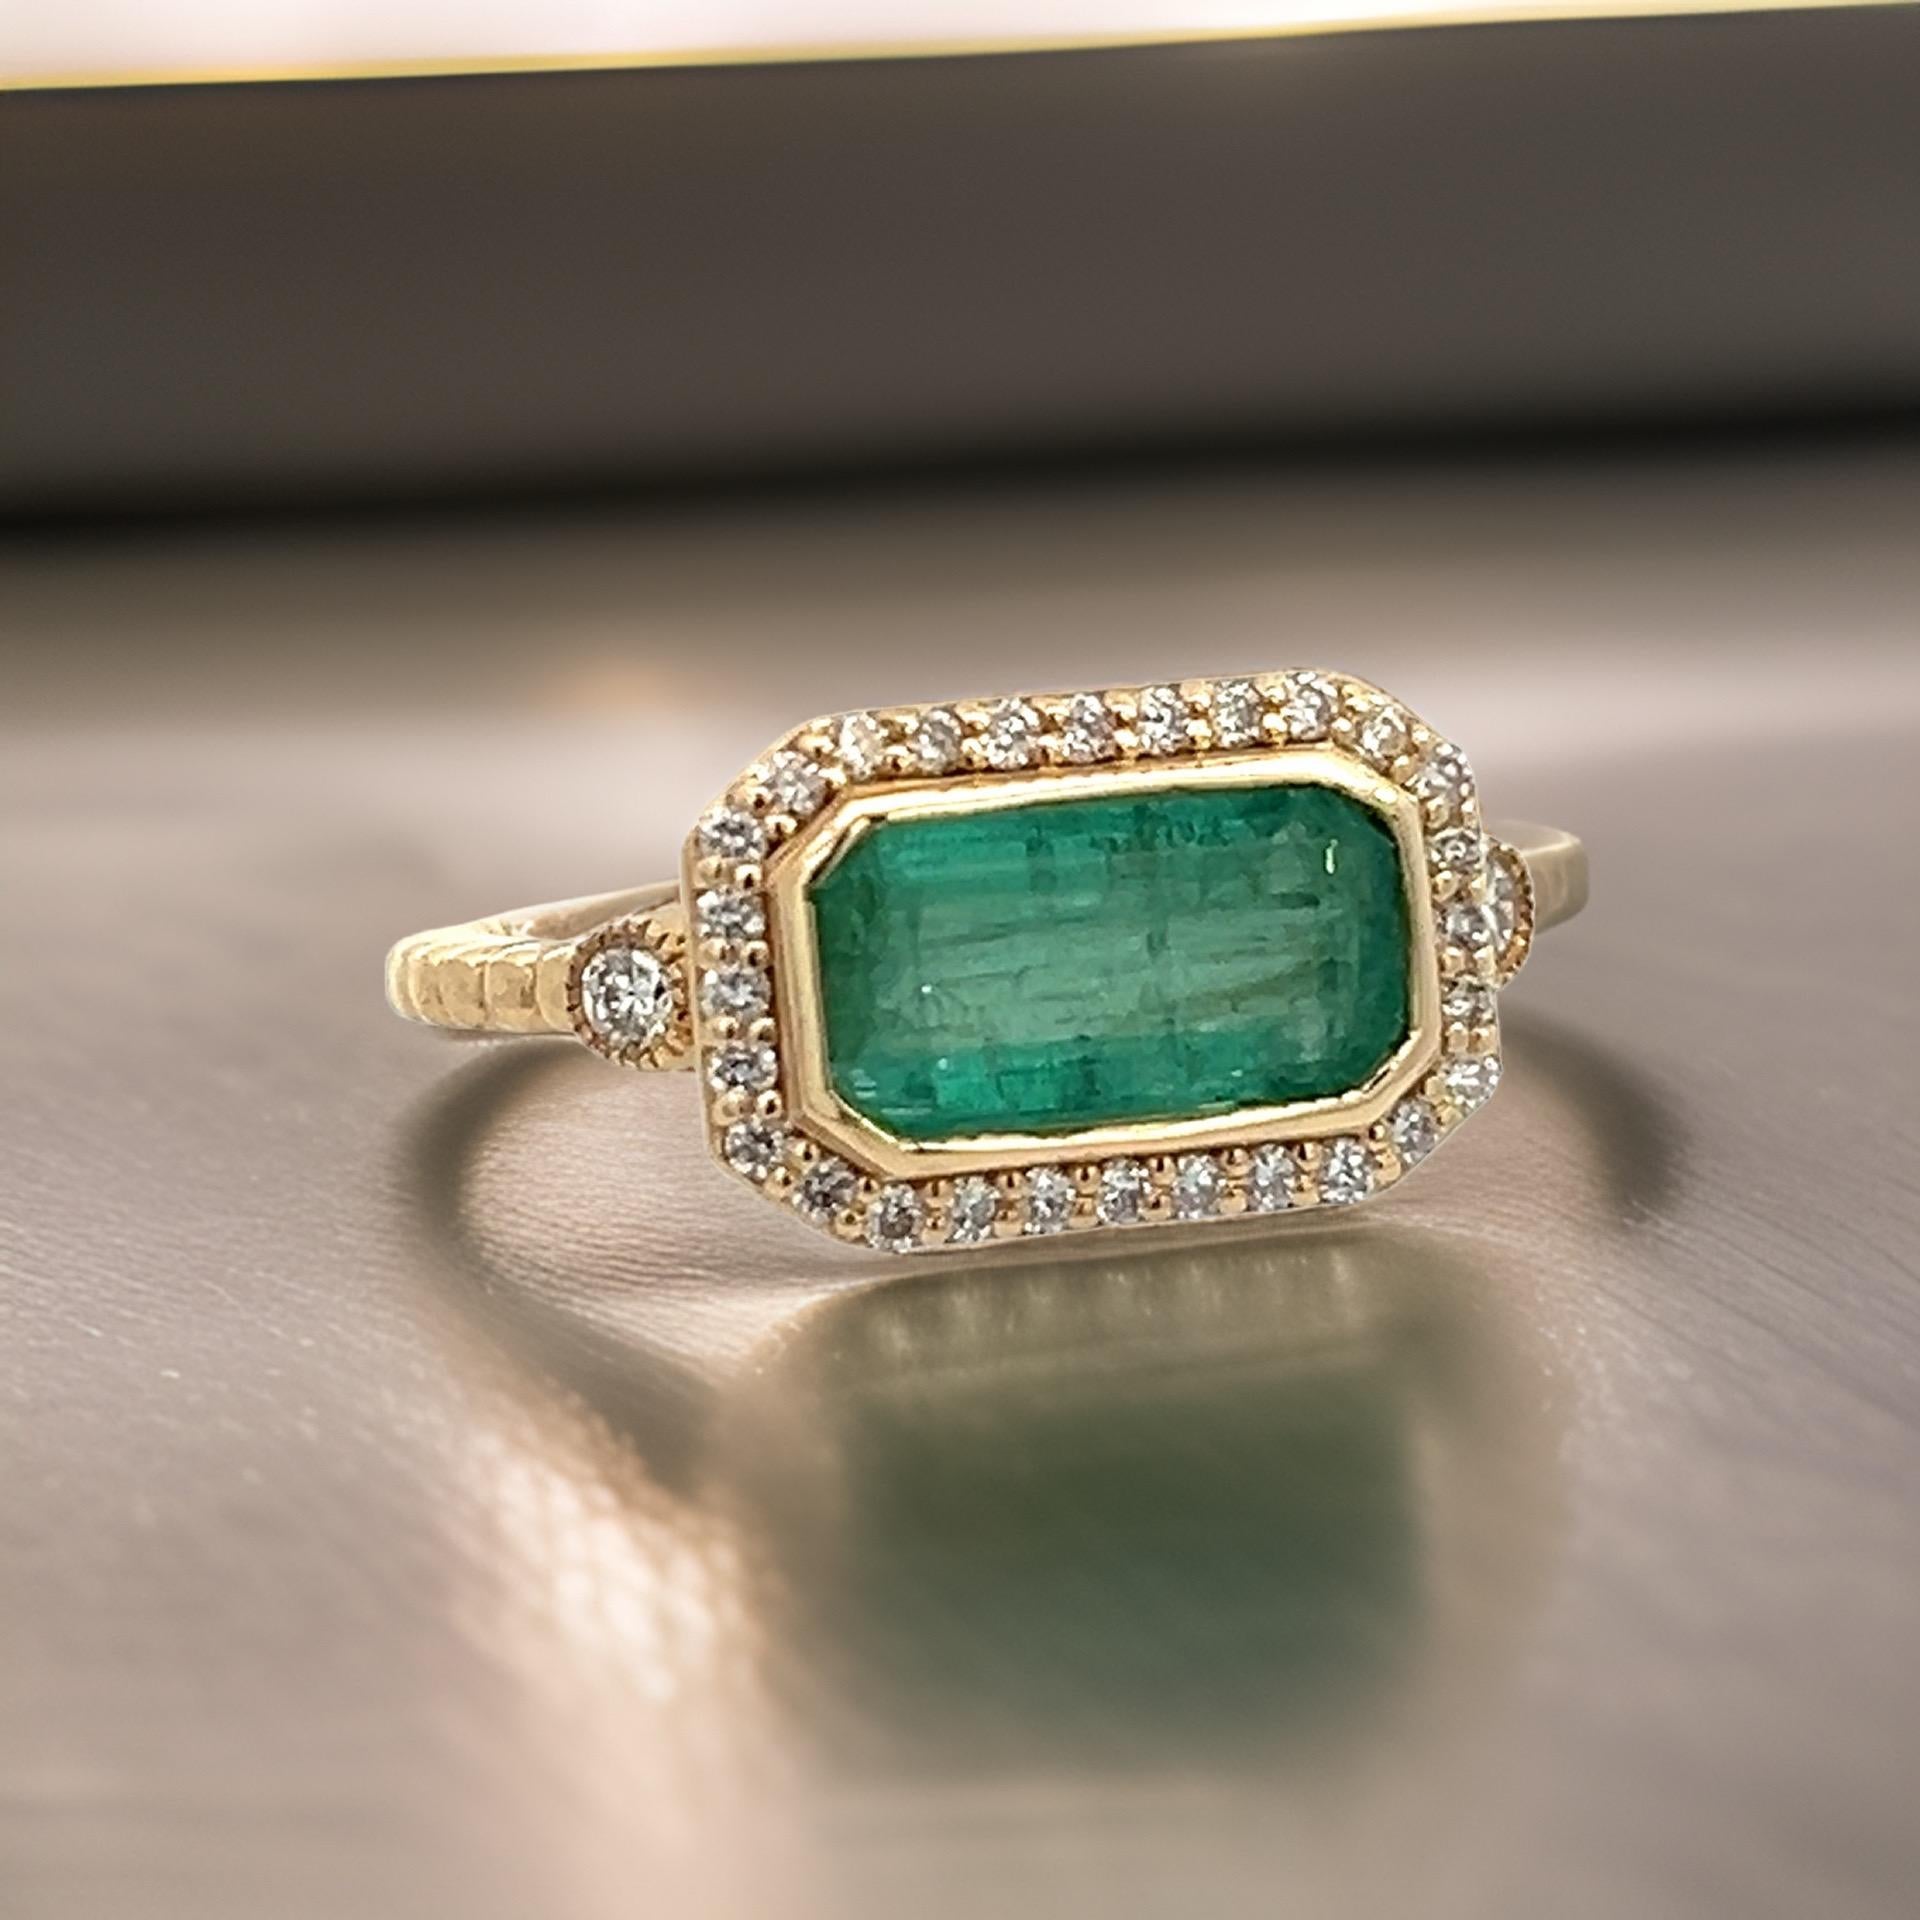 Natural Finely Faceted Quality Emerald and Diamond Ring 6.5 14k Y Gold 2.32 TCW Certified $4,950 310644
 
This is a Unique Custom Made Glamorous Piece of Jewelry!
 
Nothing says, “I Love you” more than Diamonds and Pearls!
 
This Emerald ring has